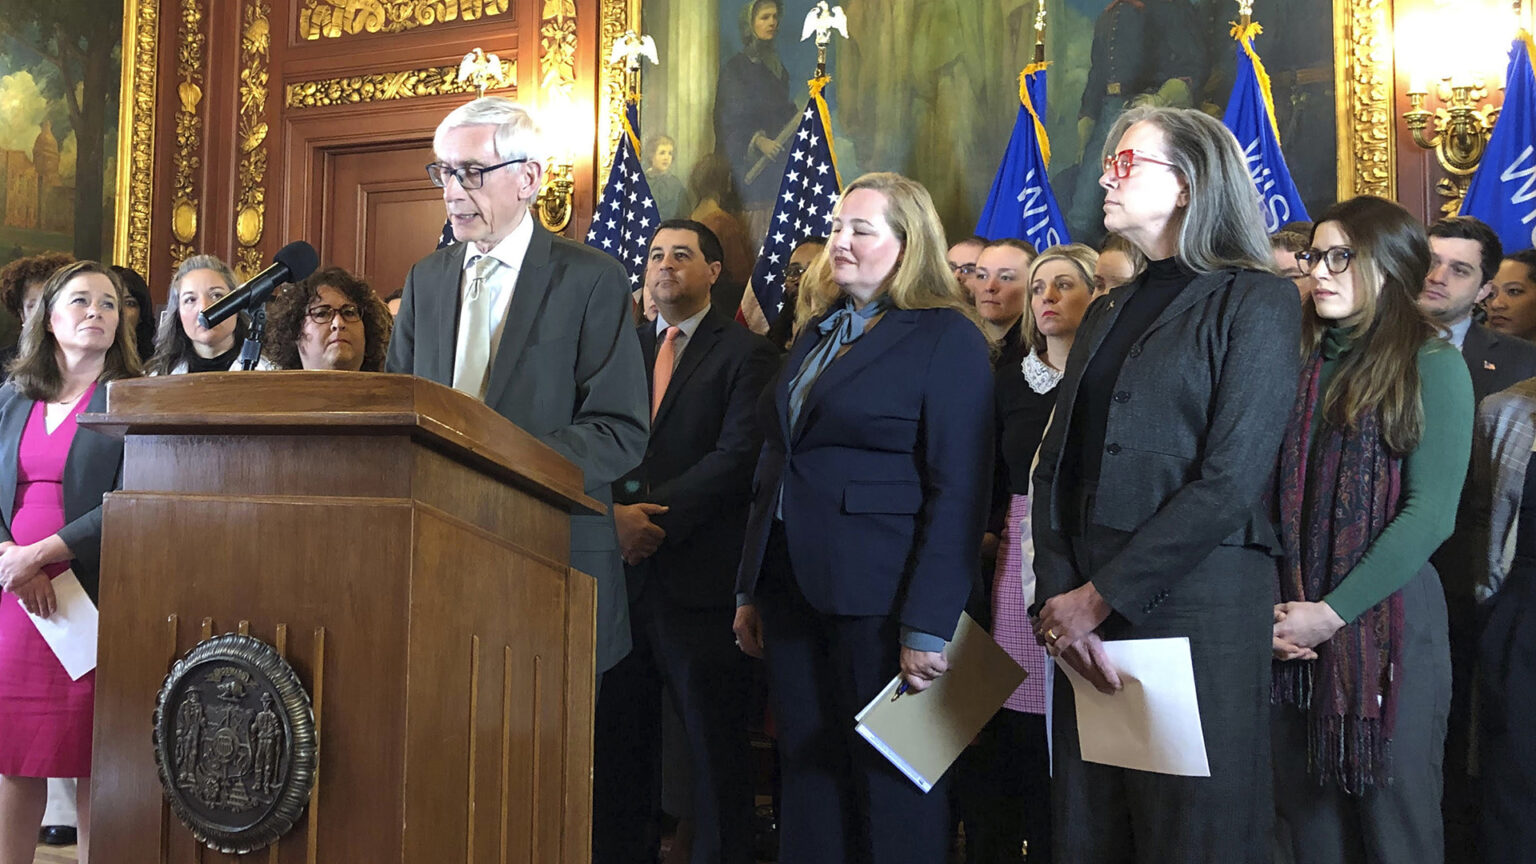 Tony Evers stands behind a podium with a brass Great Seal of the State of Wisconsin and speaks, with Josh Kaul behind him and Sara Rodriguez to his right, standing among state legislators with paintings, gilded wall moulding, and U.S. and Wisconsin flags in the background.